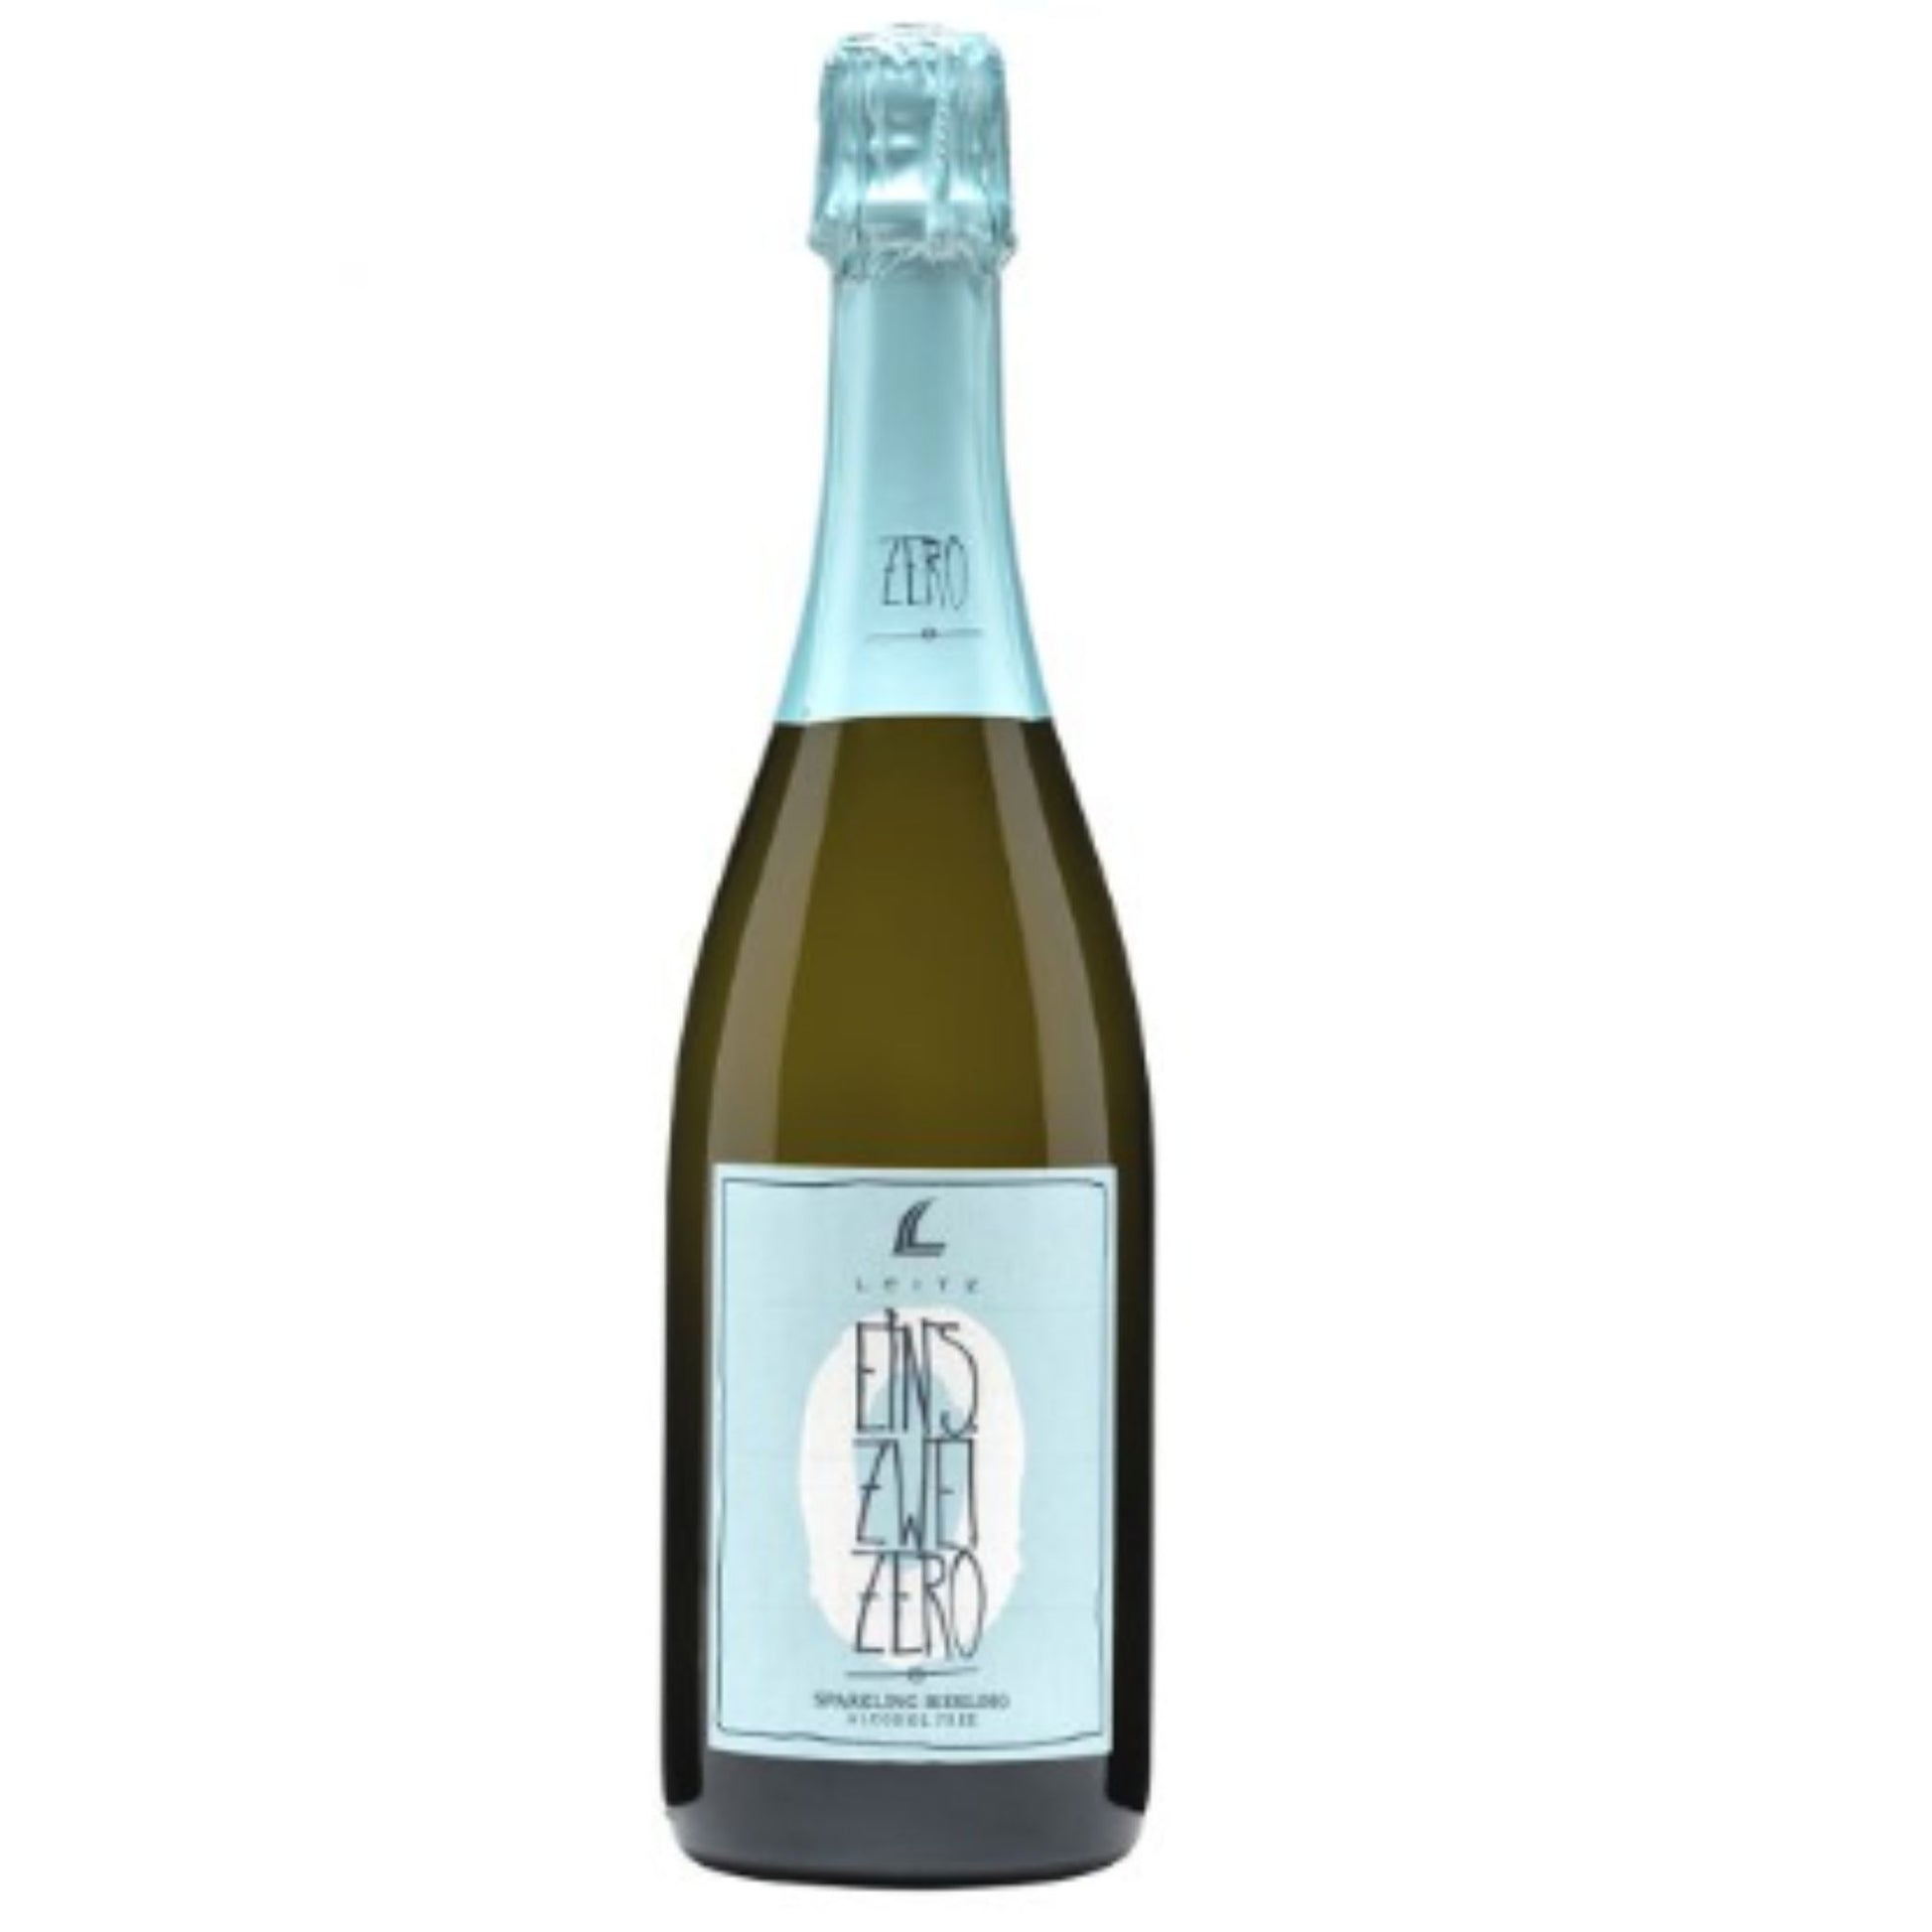 Leitz Eins-Zwei-Zero Sparkling Riesling is available for sale at Knyota Drinks.